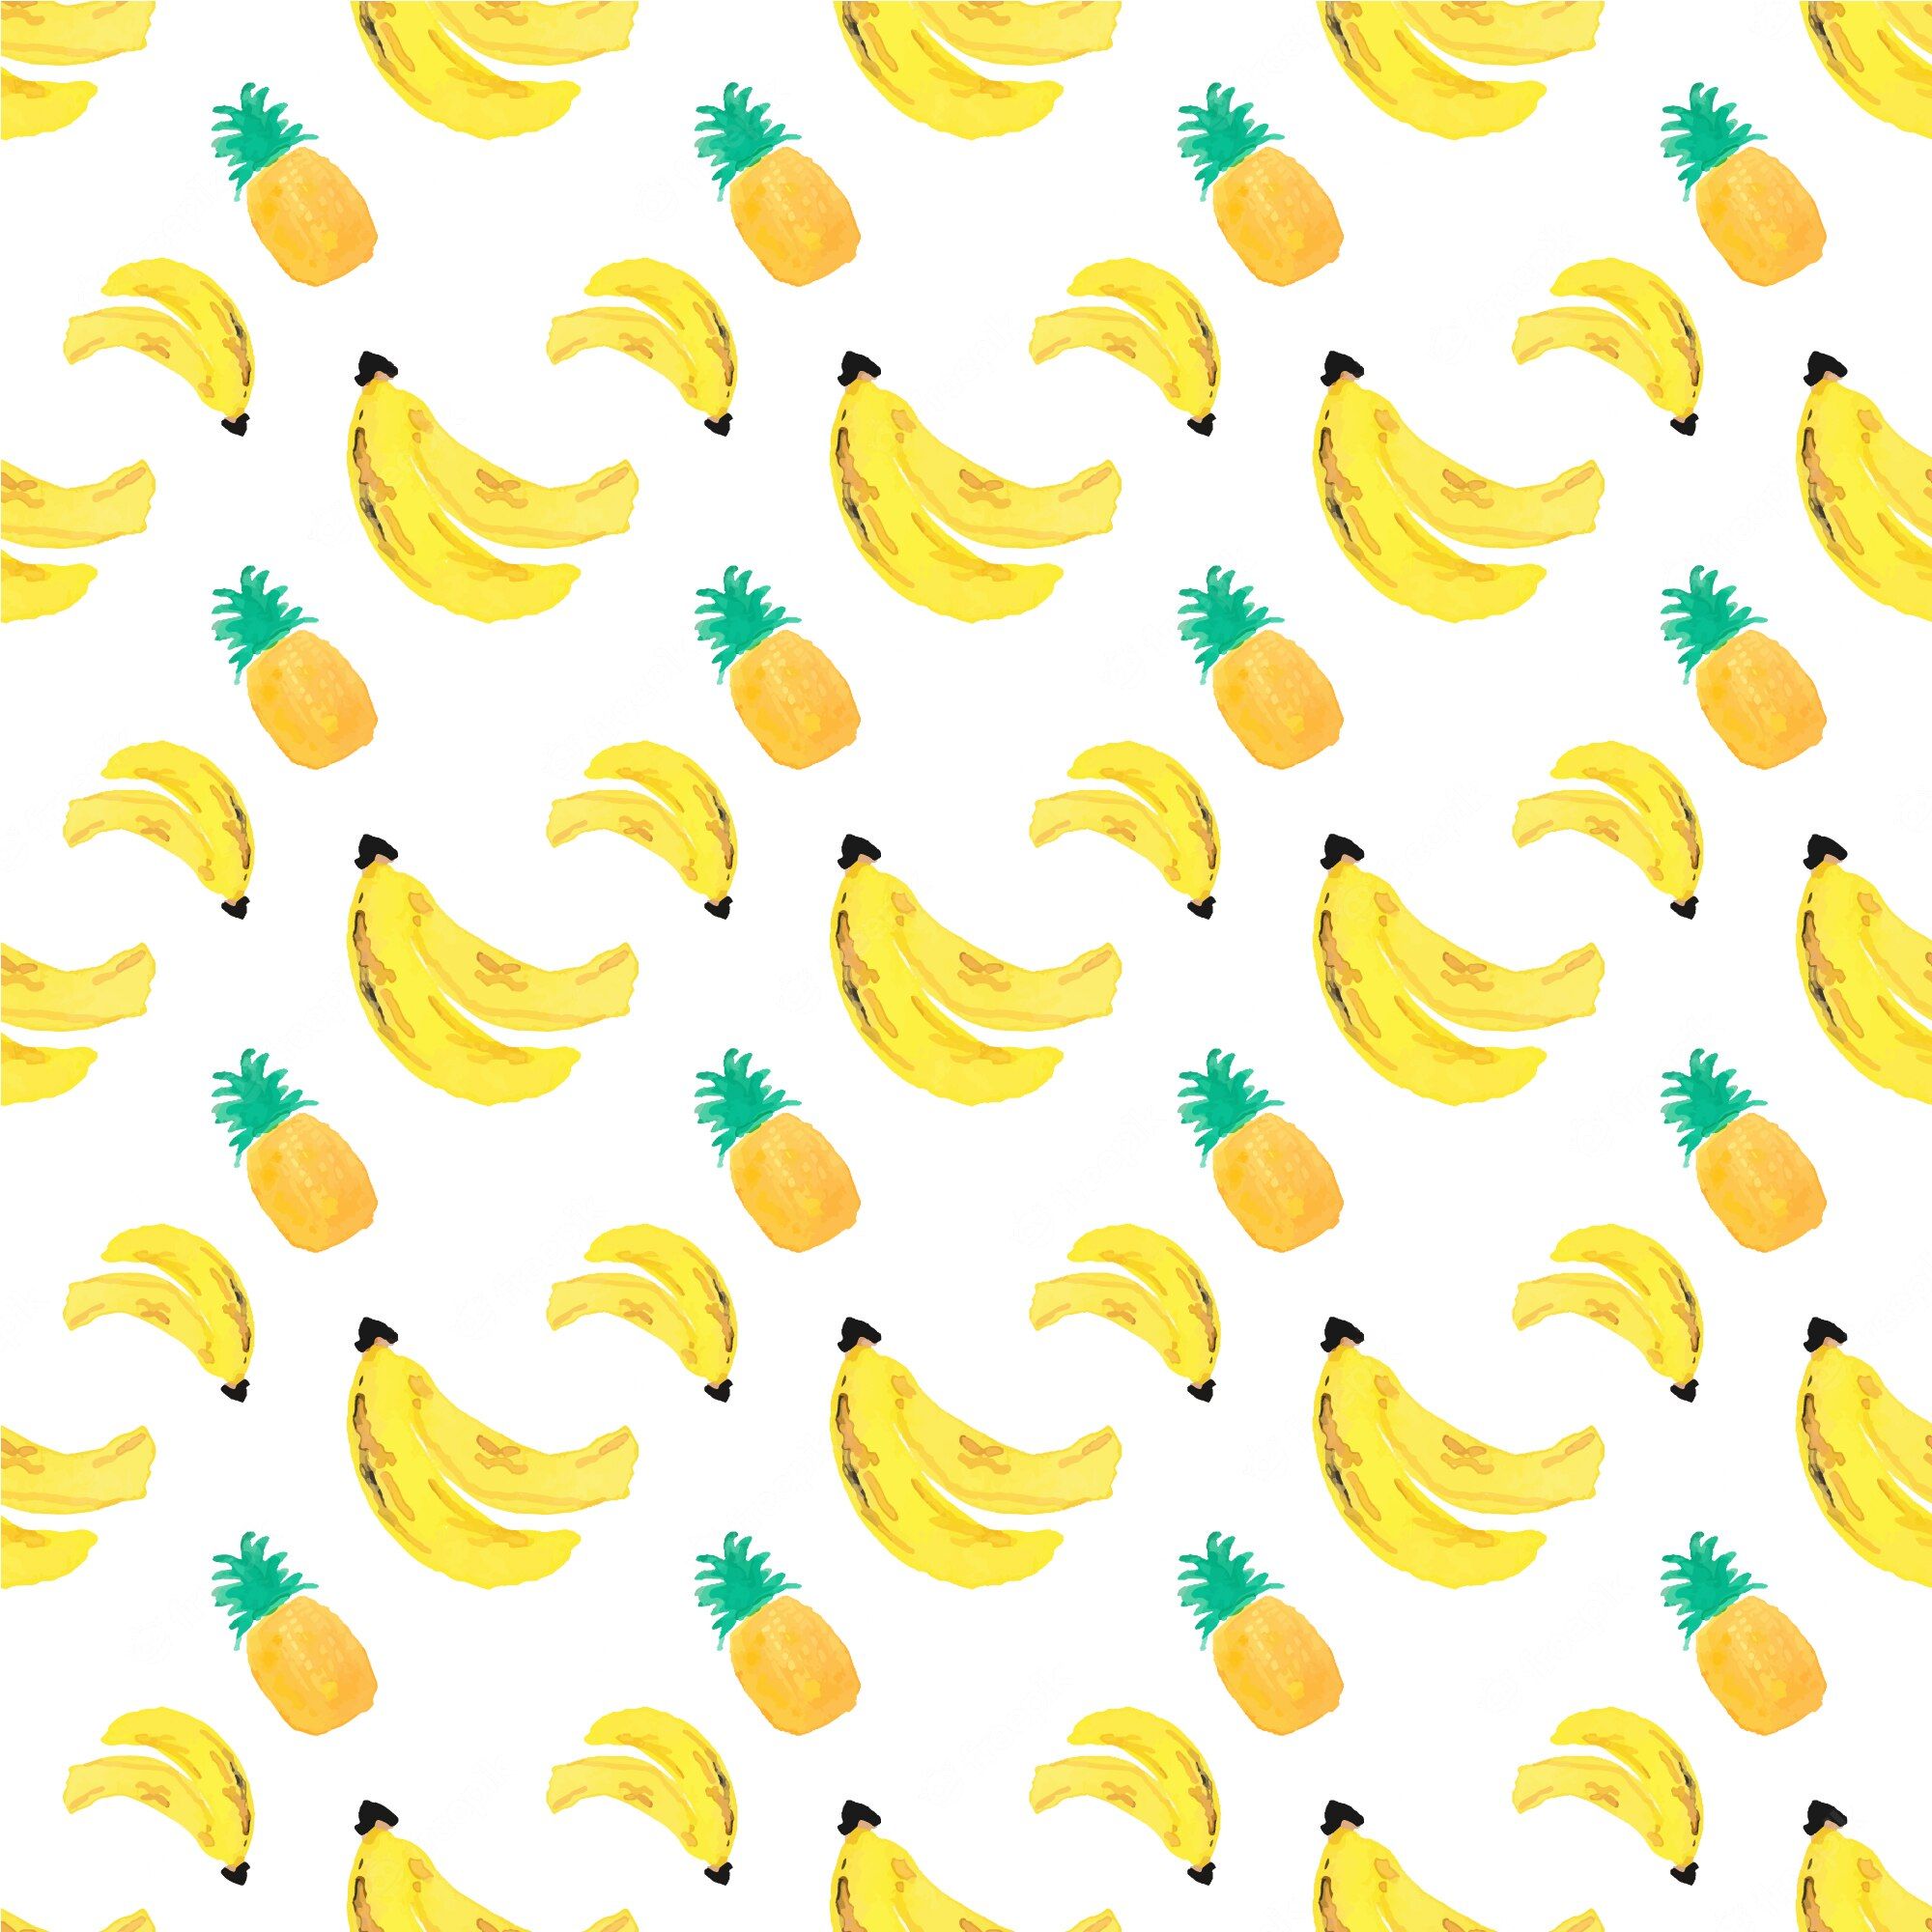 Banana white background Vectors & Illustrations for Free Download